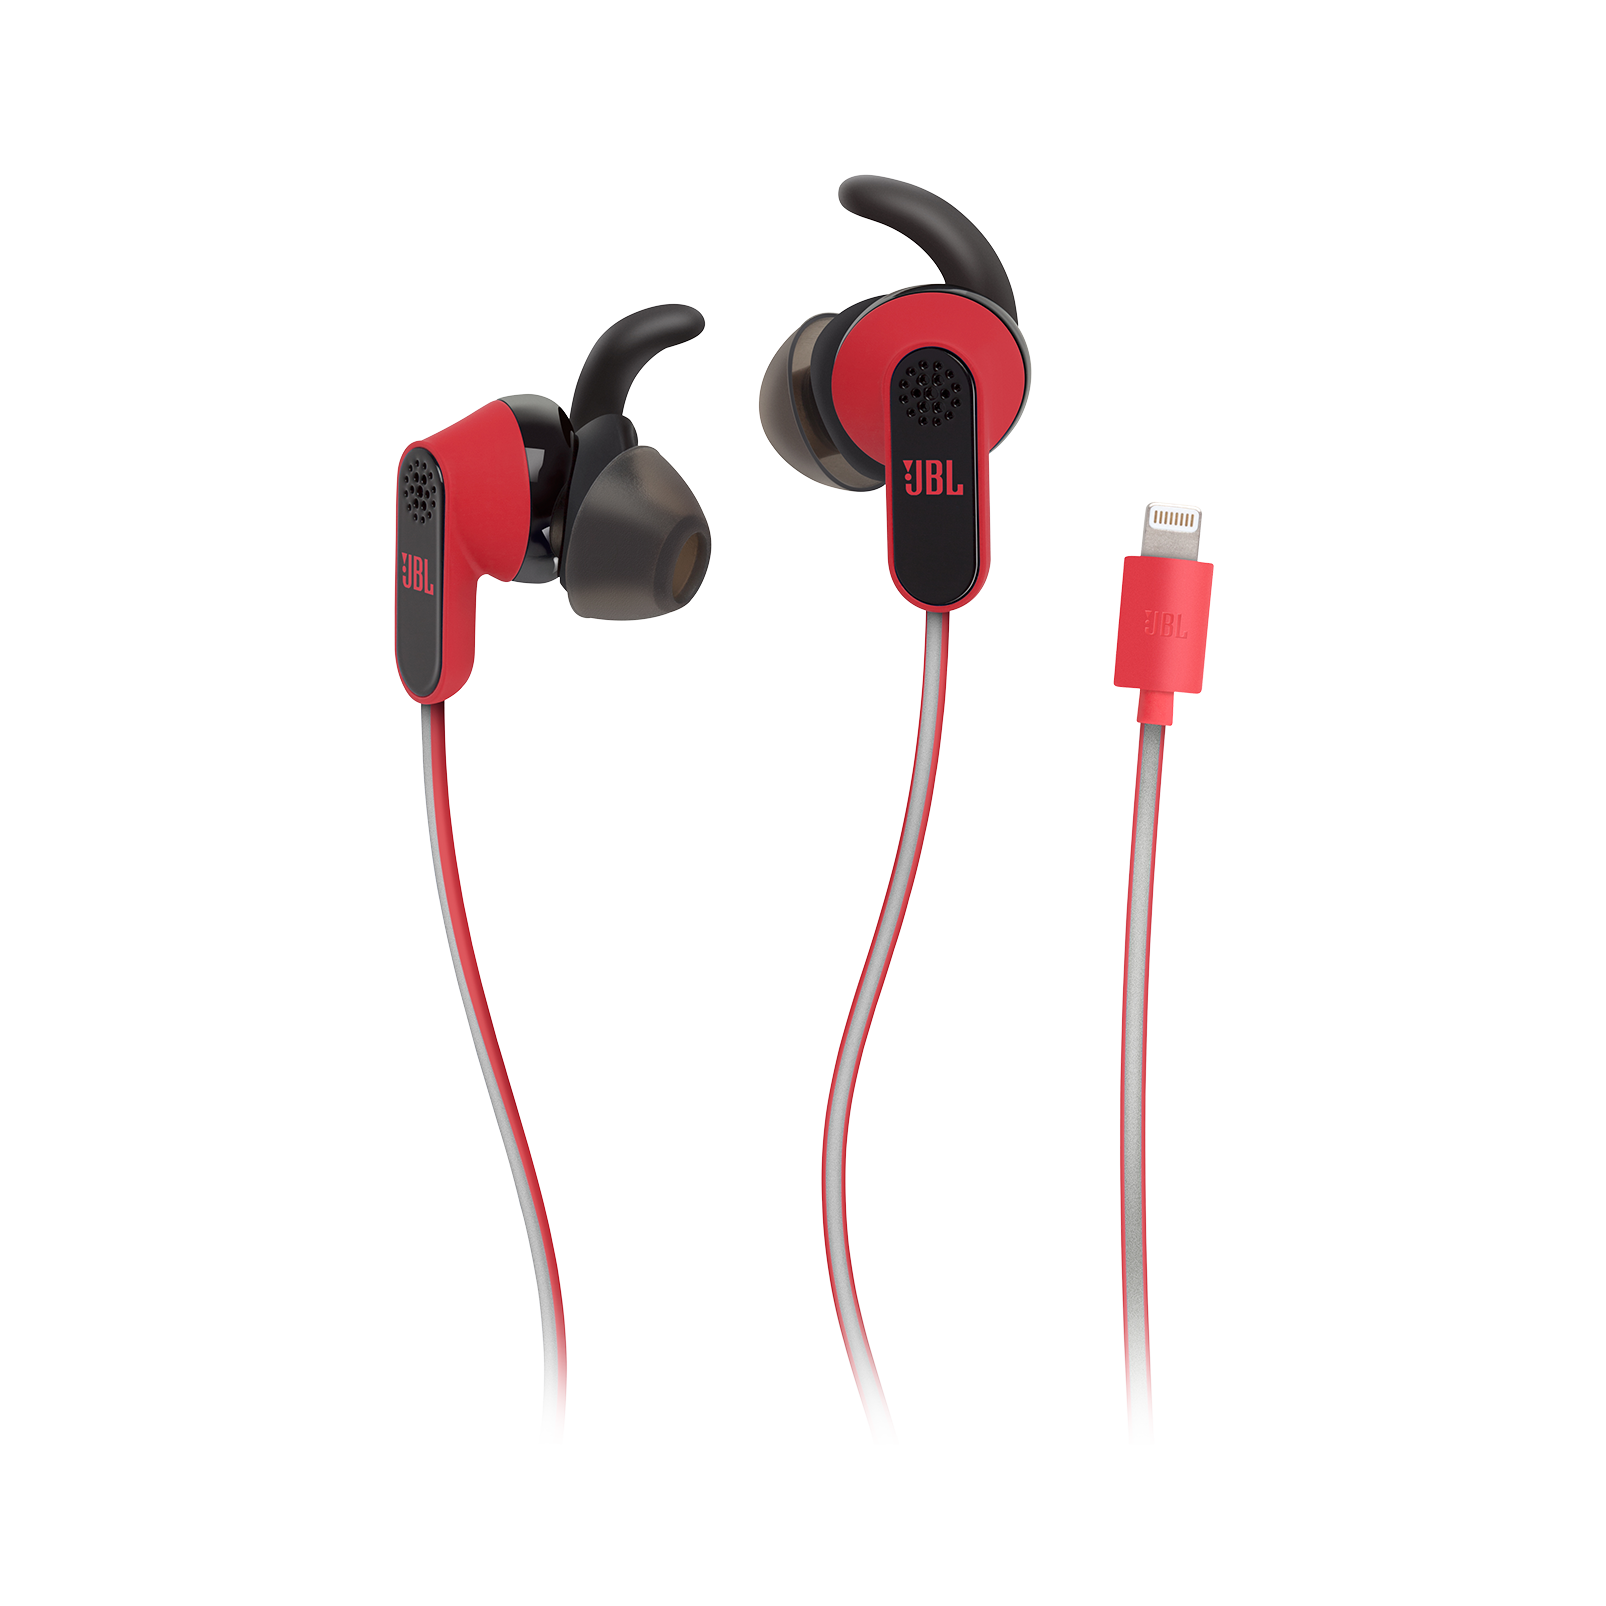 Reflect Aware - Red - Lightning connector sport earphone with Noise Cancellation and Adaptive Noise Control. - Hero